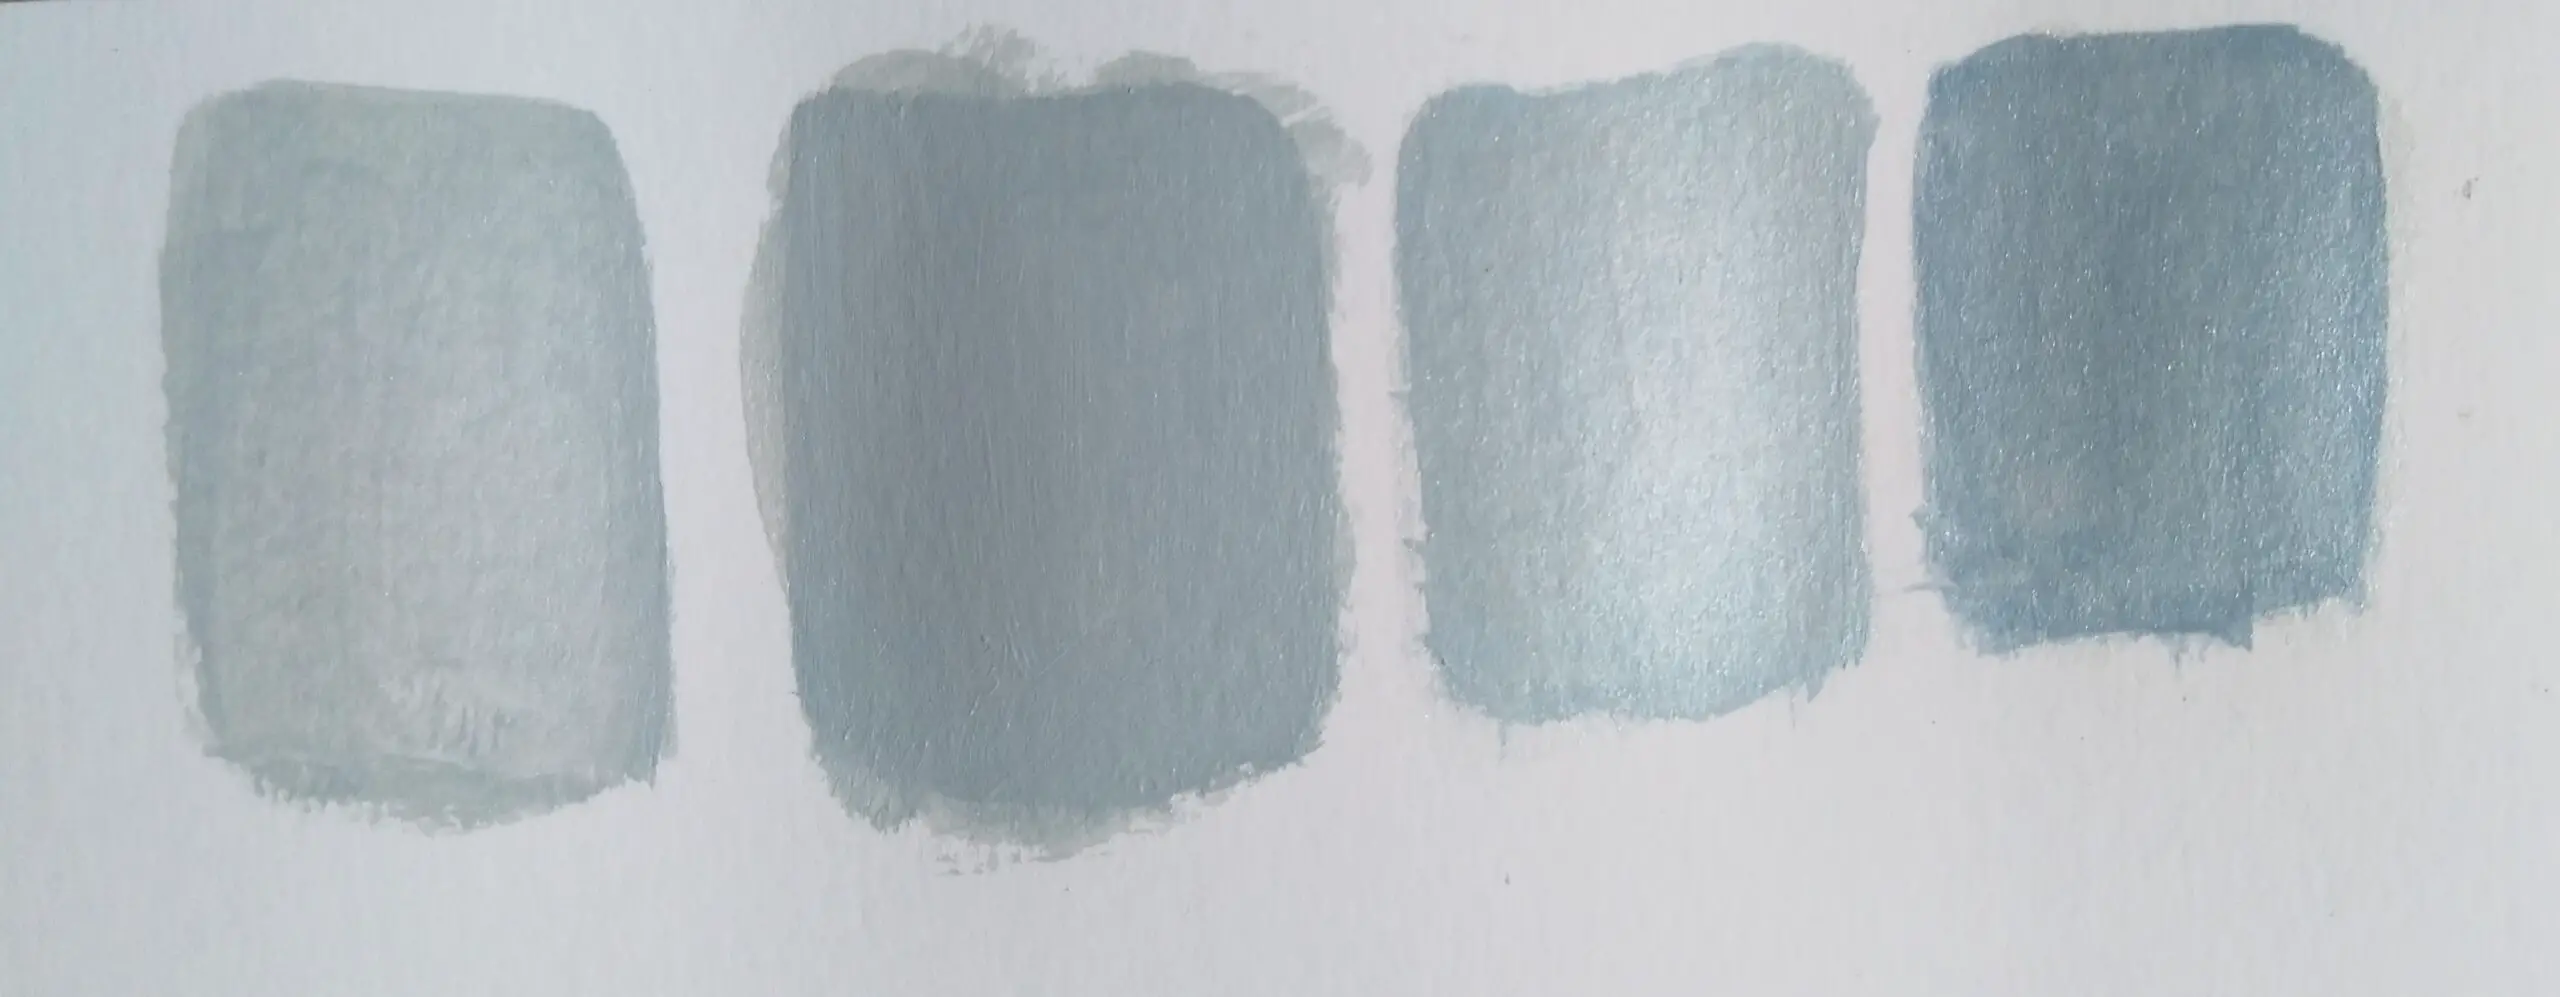 What colors make silver? The color mixing guide included